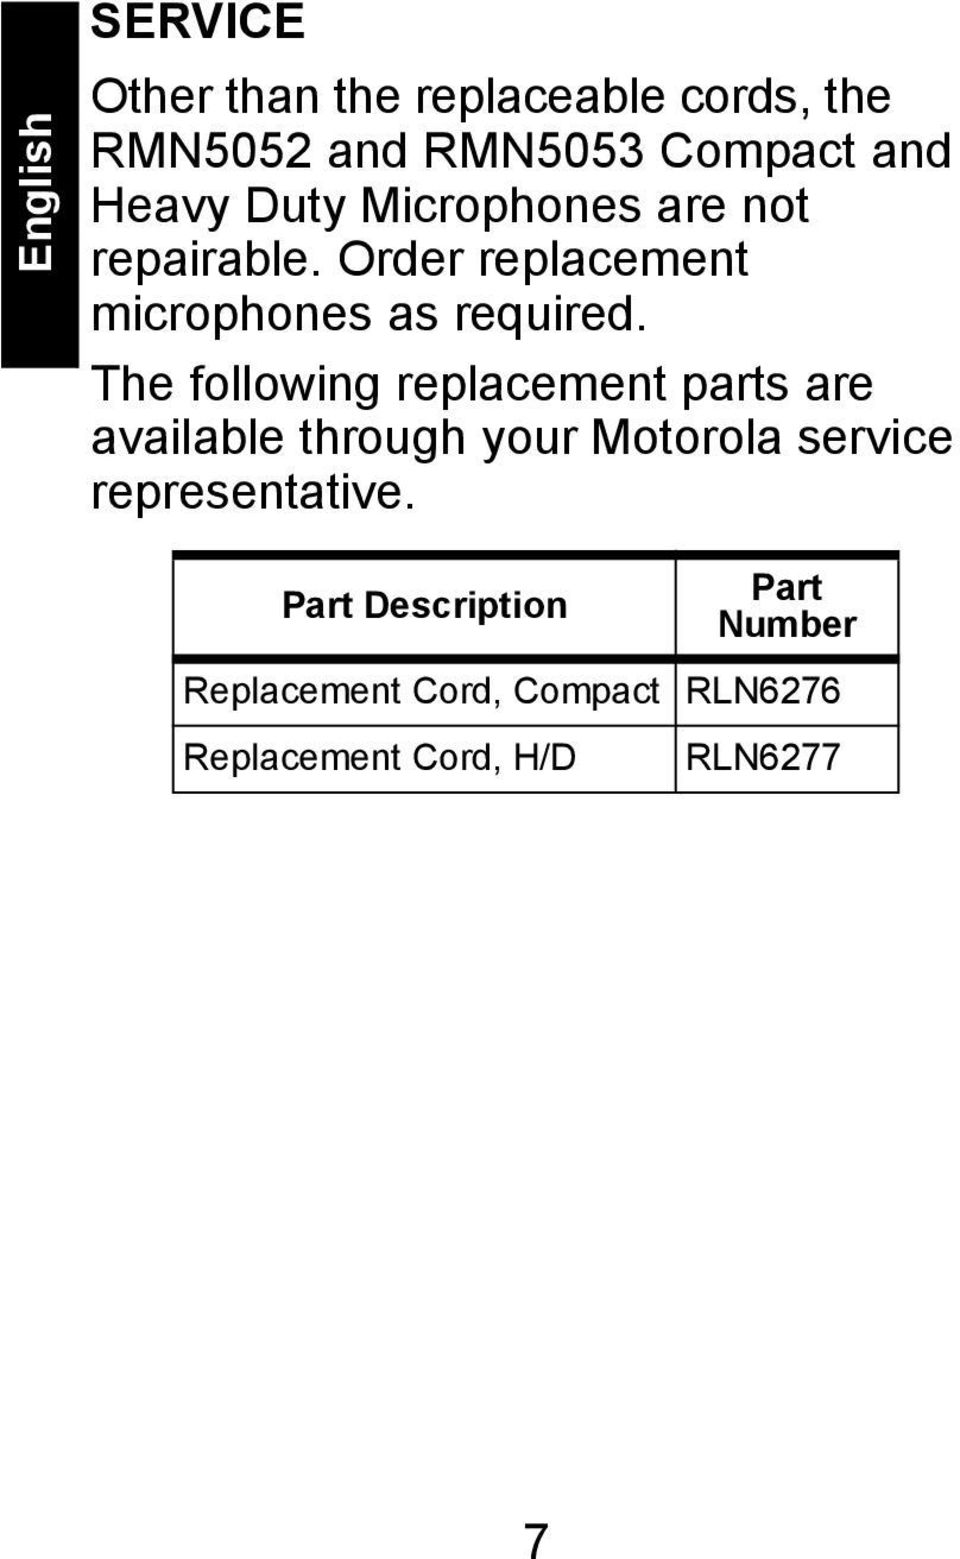 The following replacement parts are available through your Motorola service